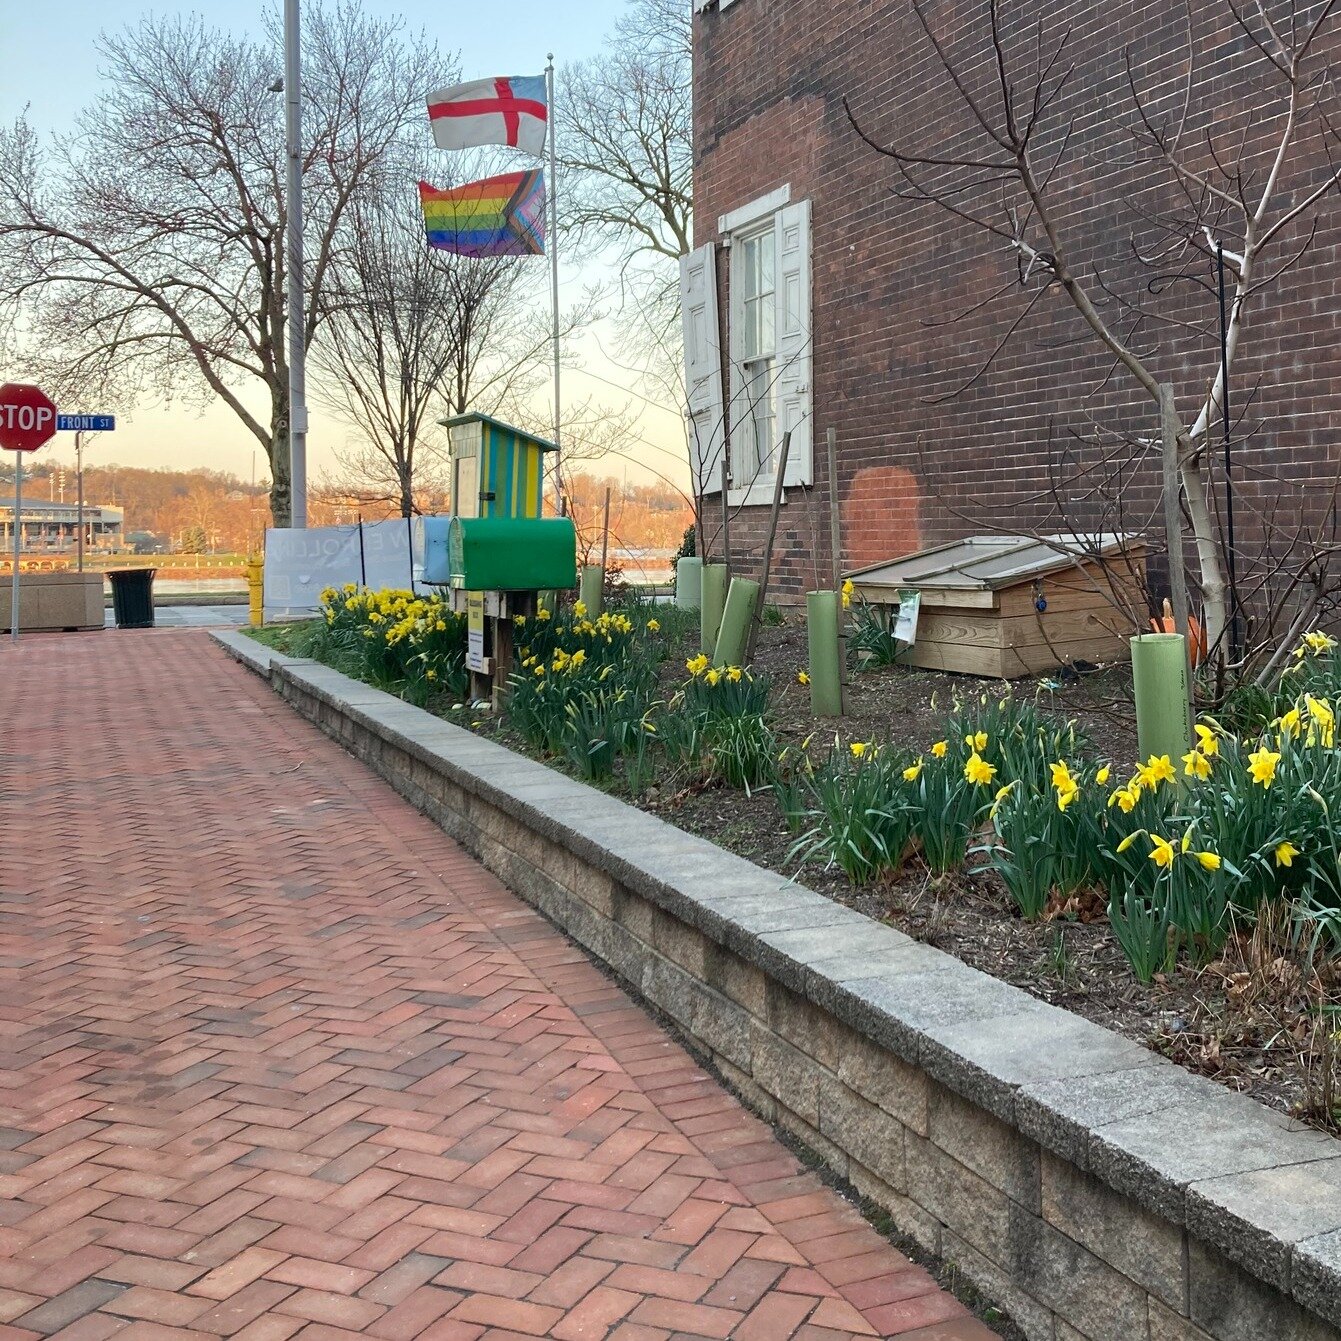 &quot;Morning has broken like the first morning,&quot;
 -- Eleanor Farjeon

A joyous Eastertide from St. Stephen's Episcopal School!